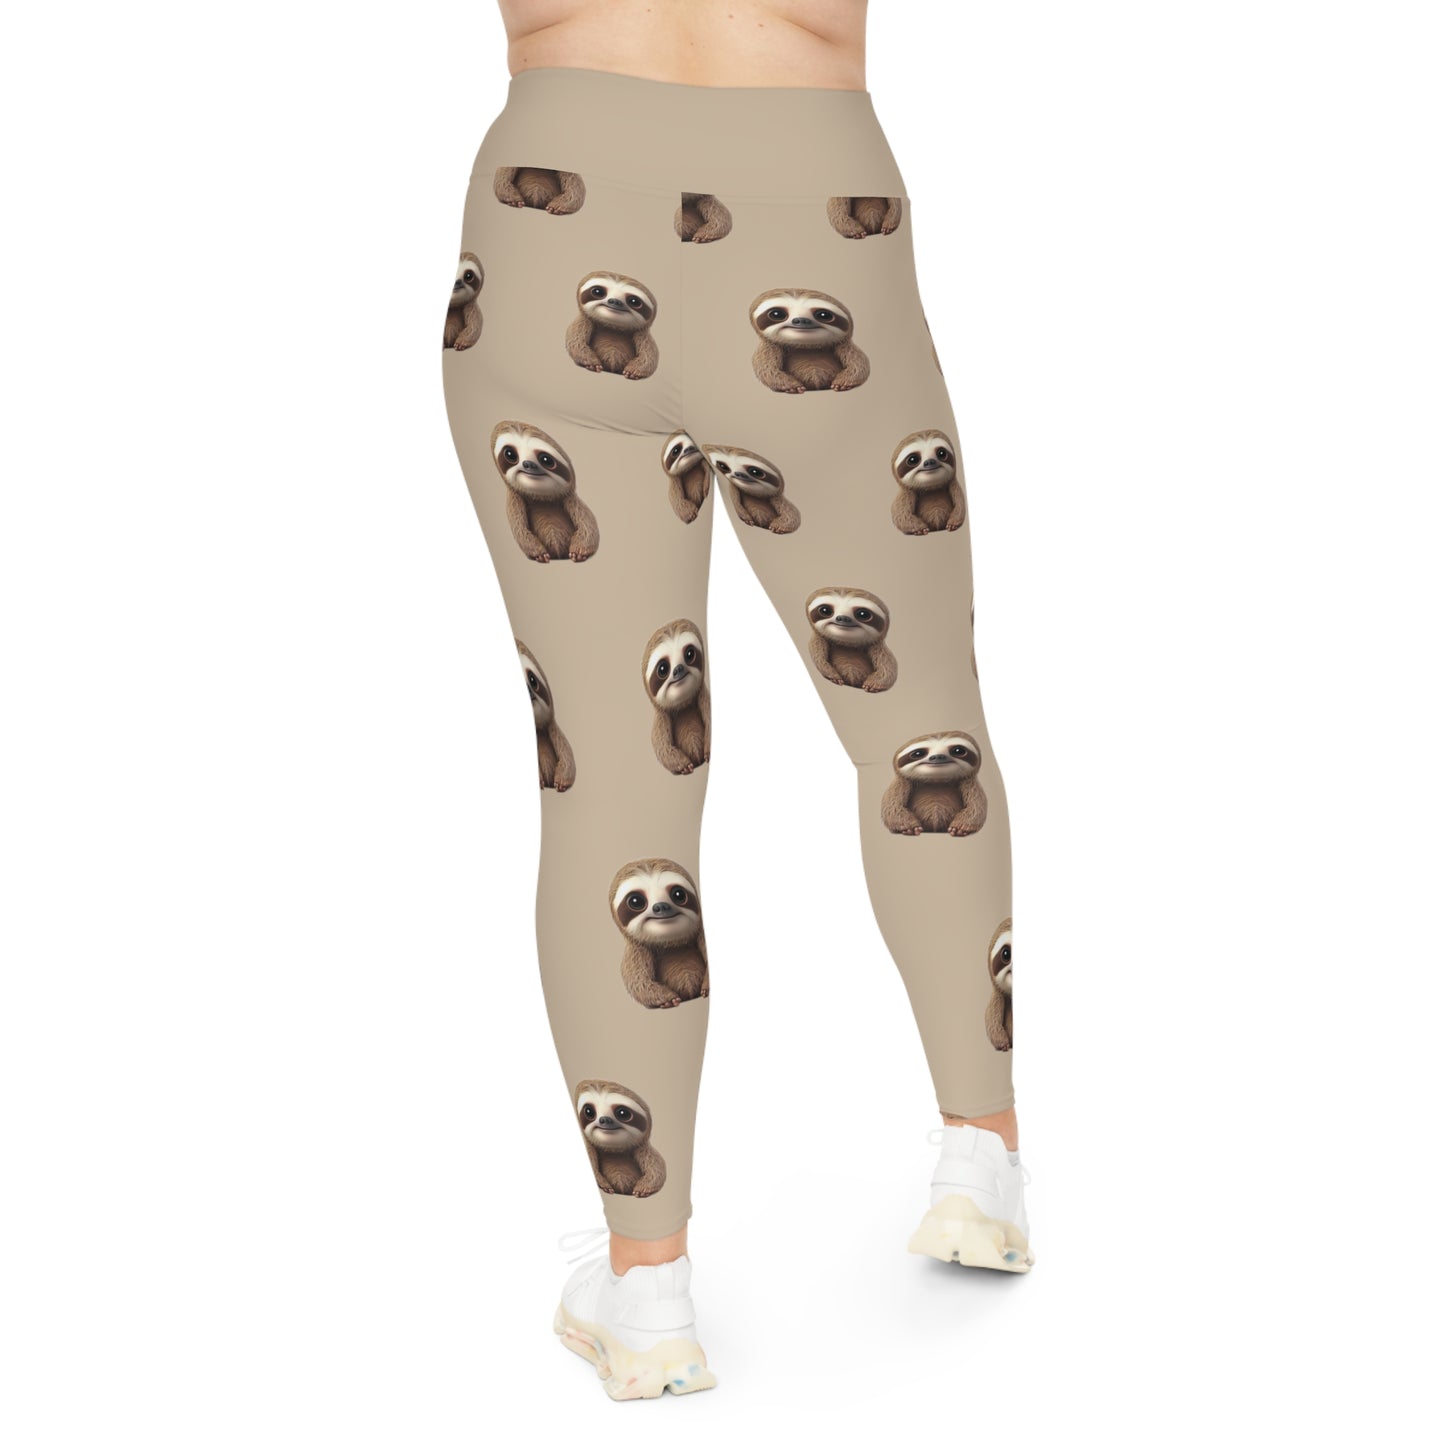 Sloth Plus Size Leggings One of a Kind Gift - Unique Workout Activewear tights for Mom fitness, Mothers Day, Girlfriend Christmas Gift